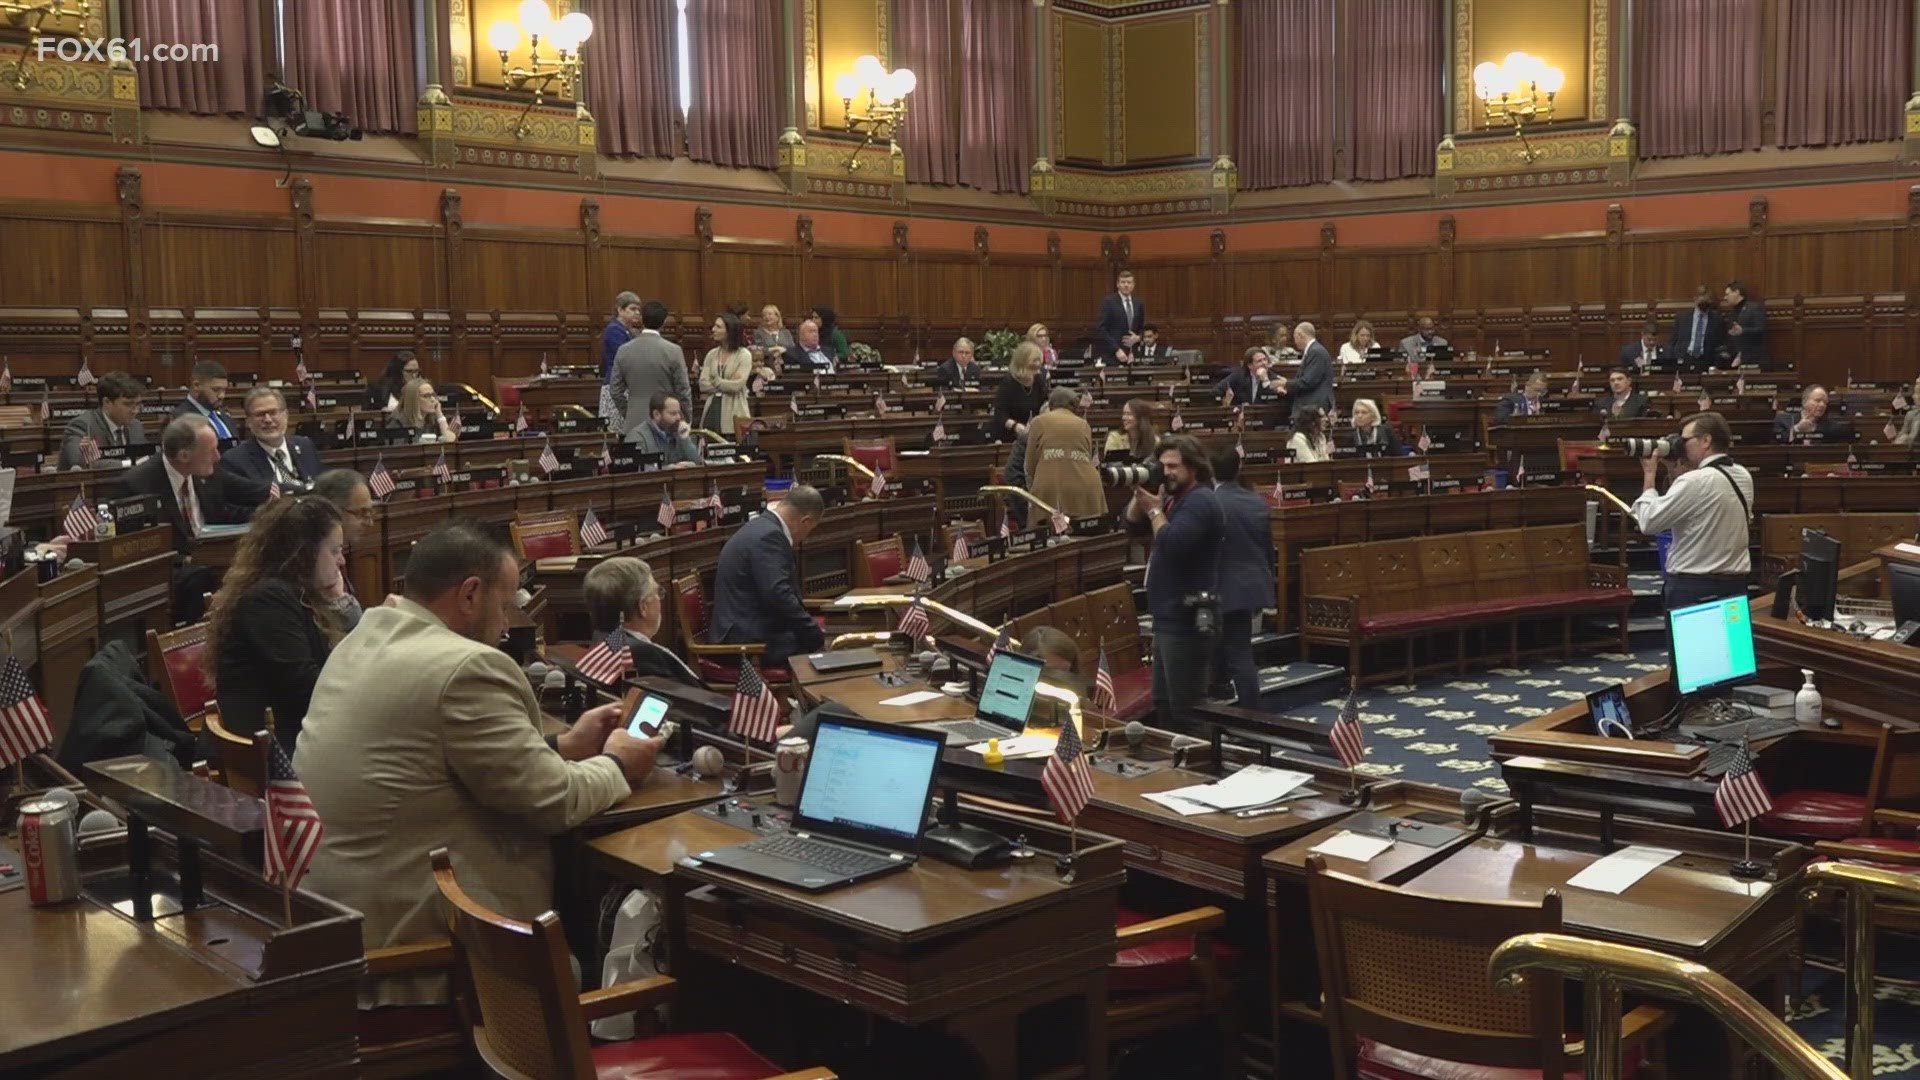 One of the focuses of the special session is considering moving the presidential election primary date ahead by four weeks.